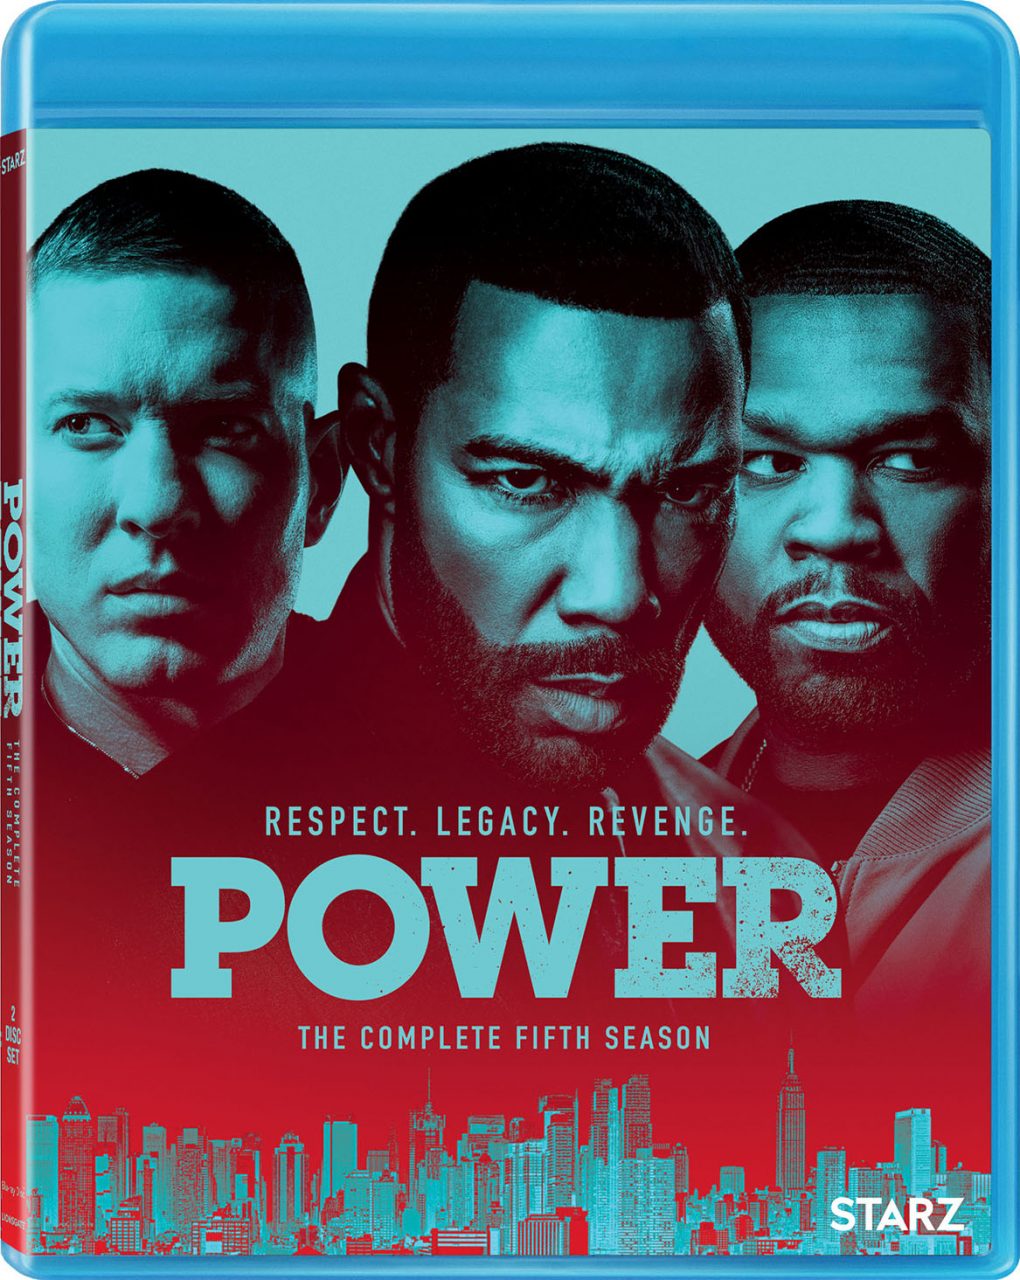 Power: The Complete Fifth Season Blu-Ray Combo cover (Lionsgate Home Entertainment)